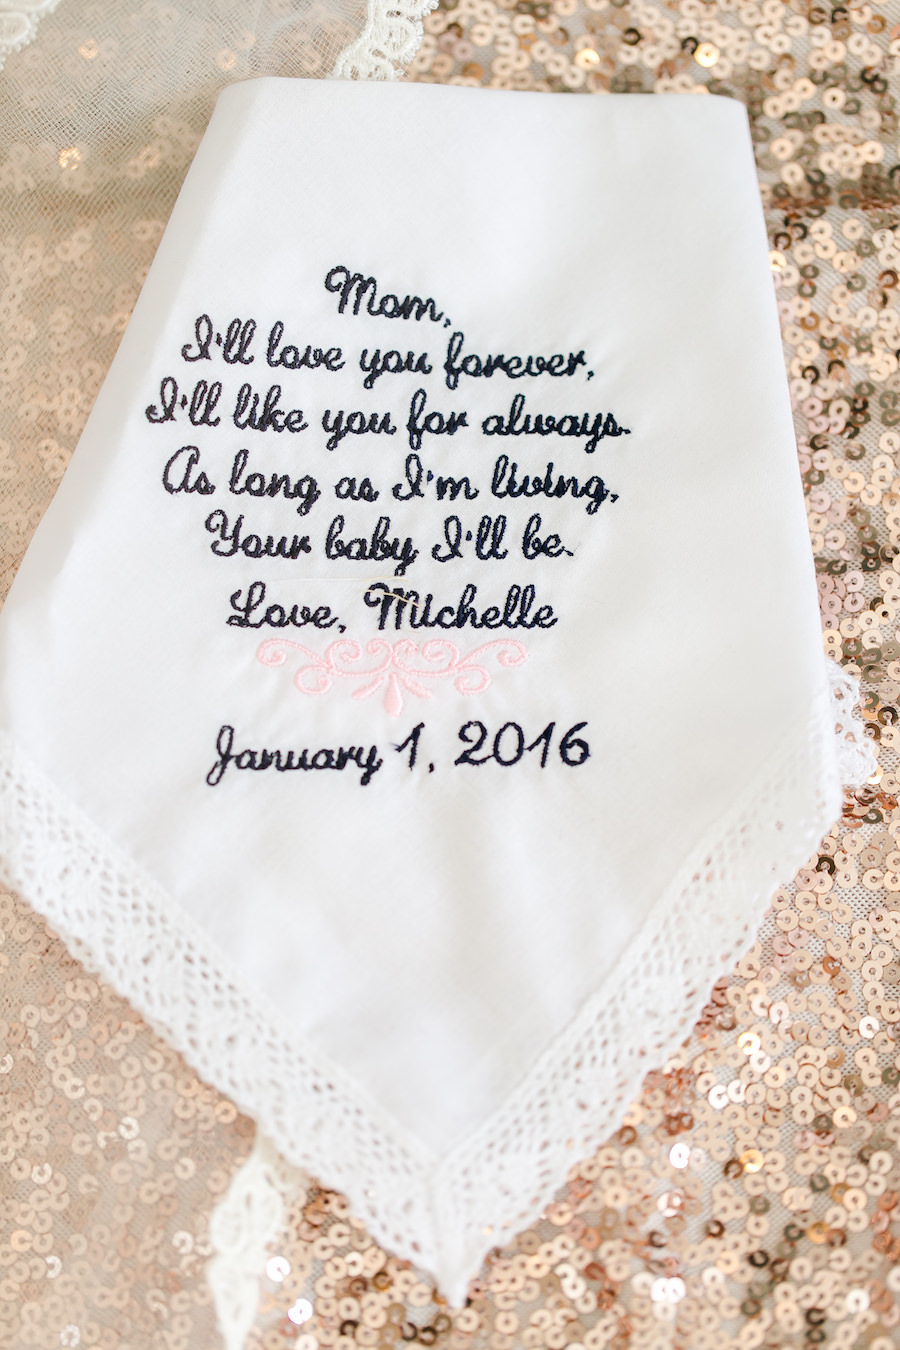 Embroidered Handkerchief Wedding Gift for Mom